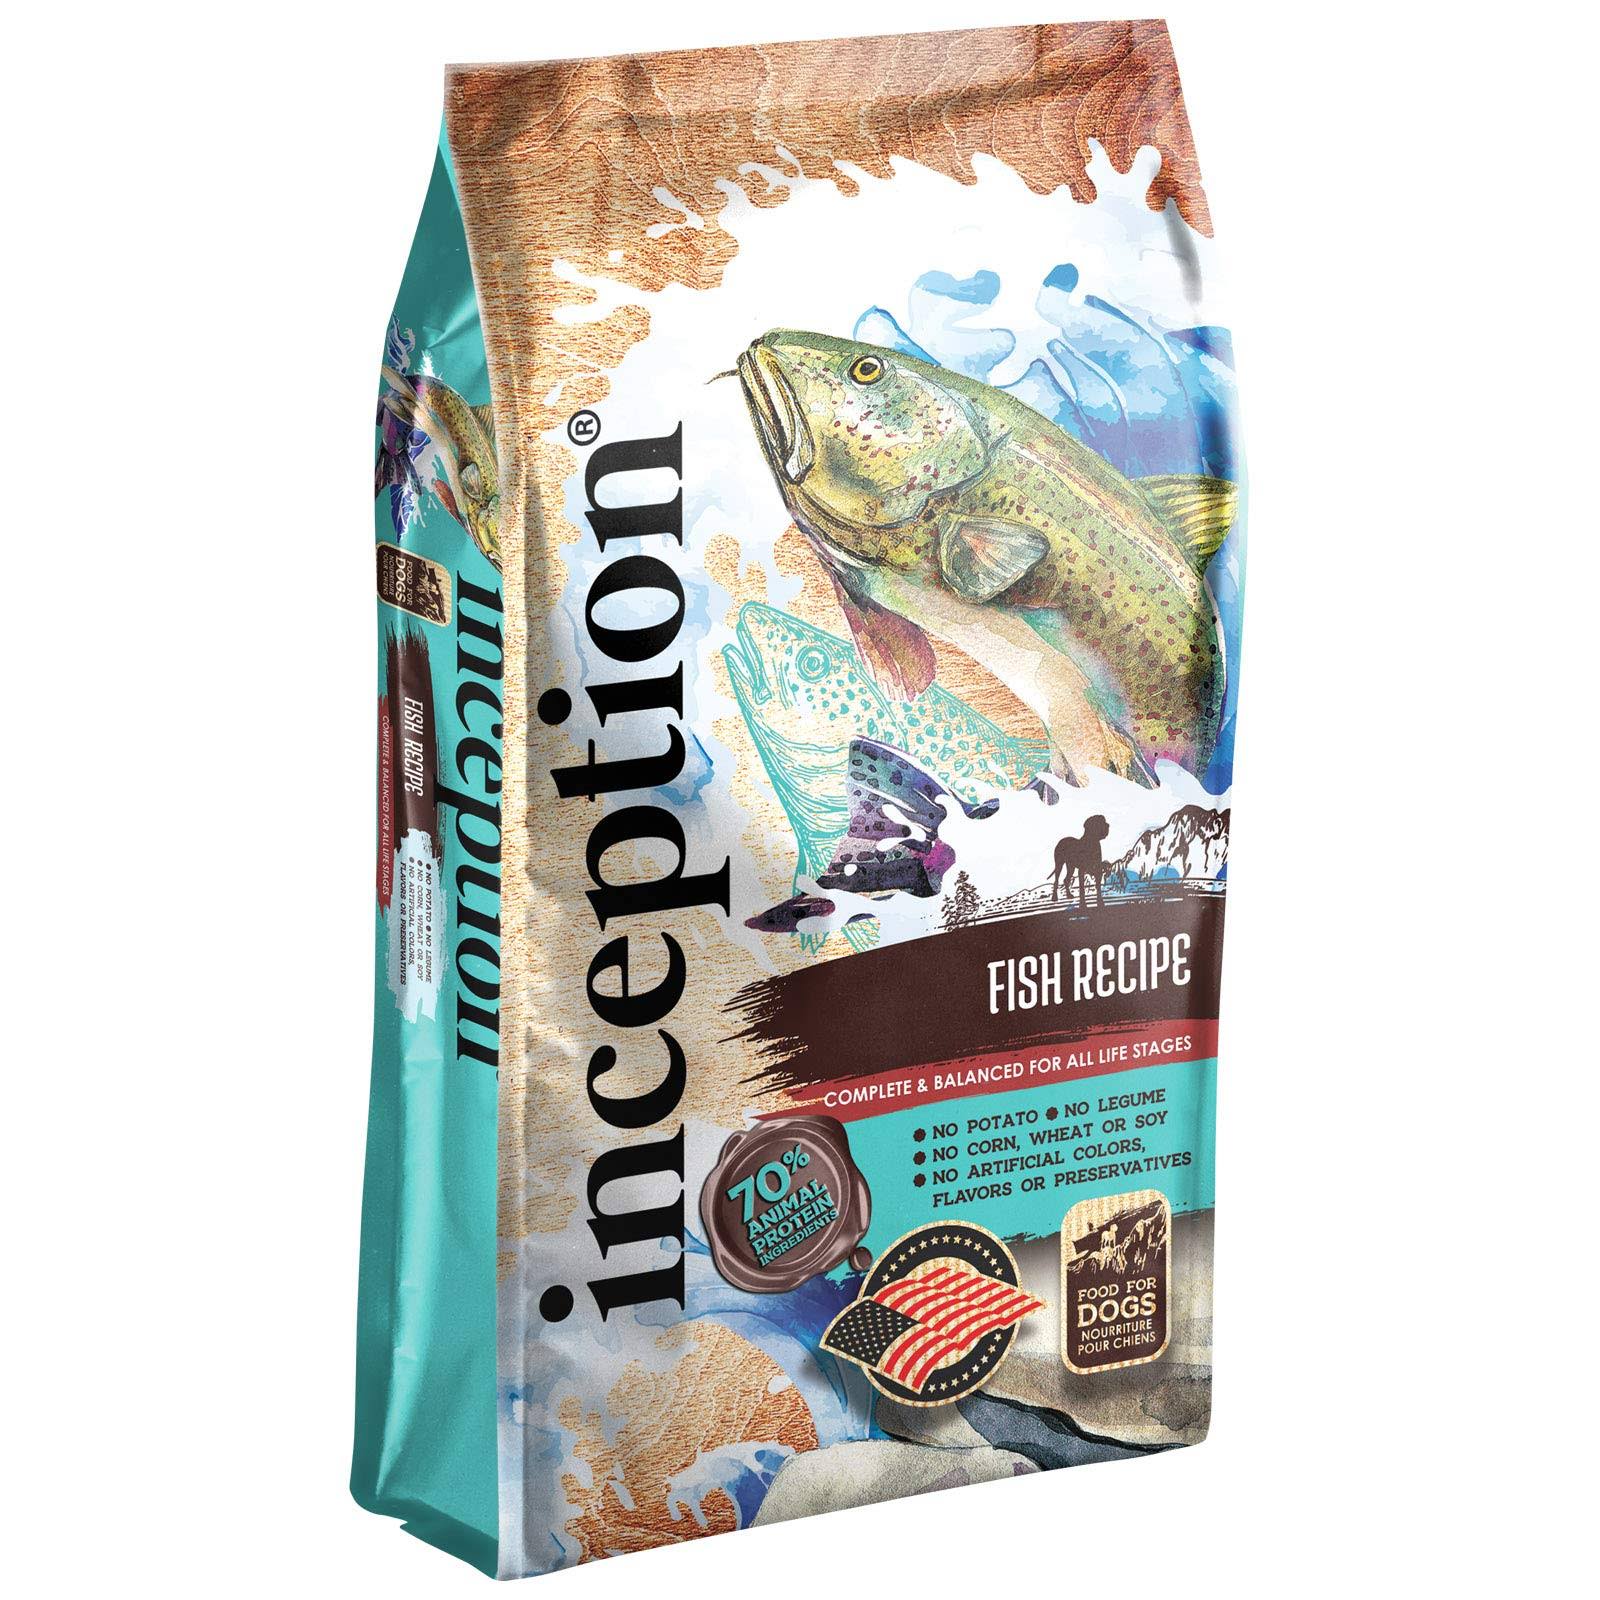 Inception Food for Dogs, Fish Recipe - 27 lb